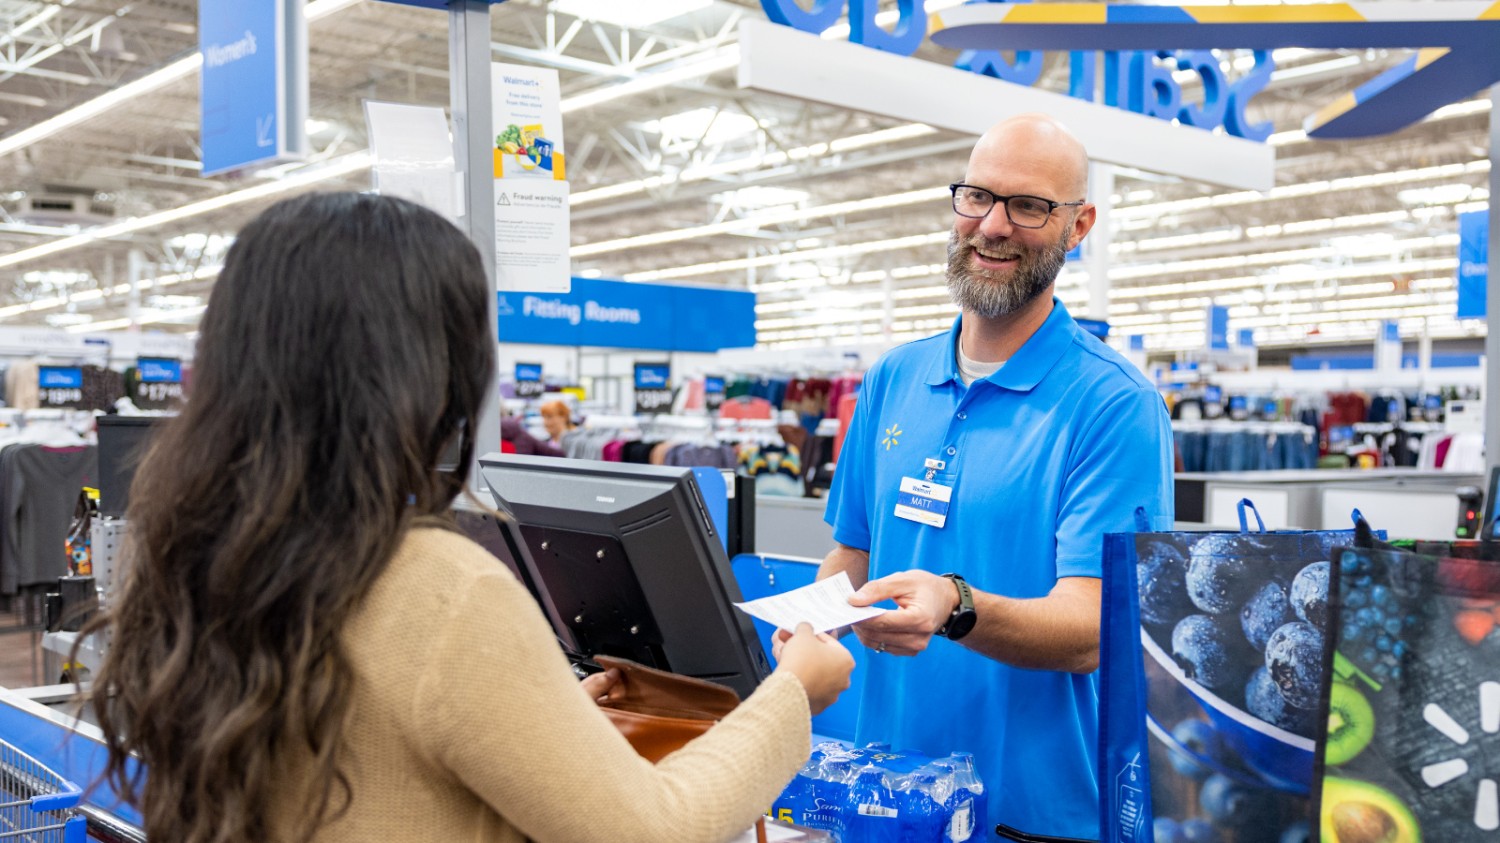 https://corporate.walmart.com/content/corporate/en_us/news/2023/01/24/continuing-to-strengthen-our-jobs-and-invest-in-our-people/jcr:content/newsimage.img.jpg/1693432566228.jpg